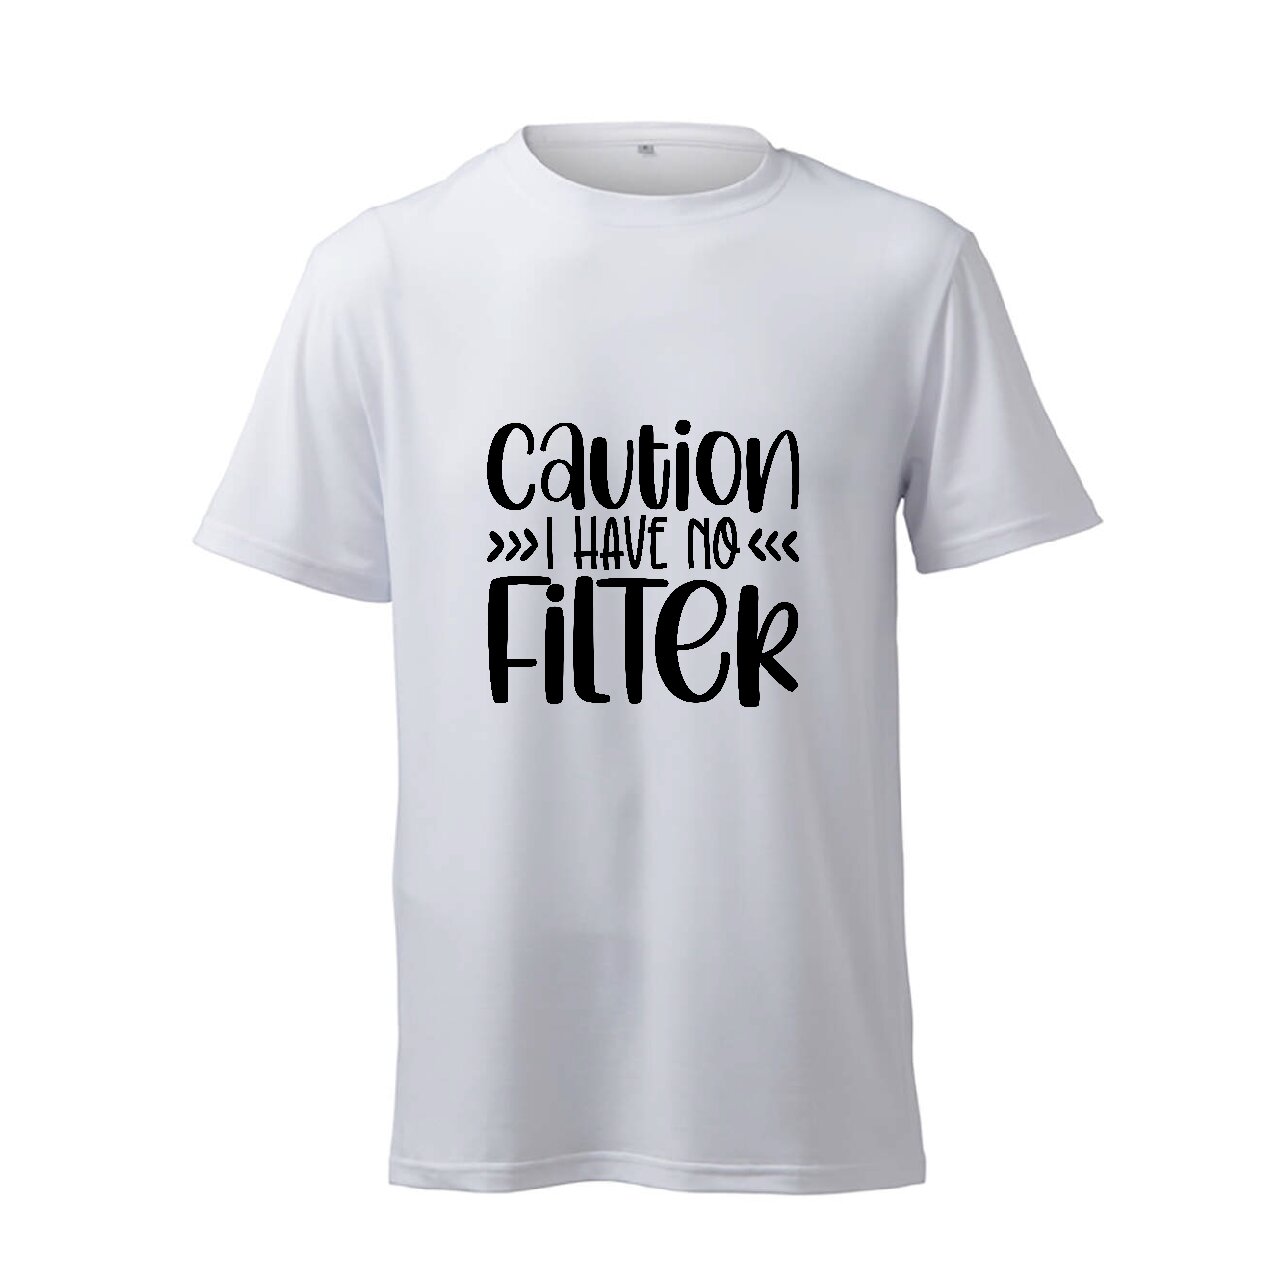 Caution I Have No Filter - T-Shirt